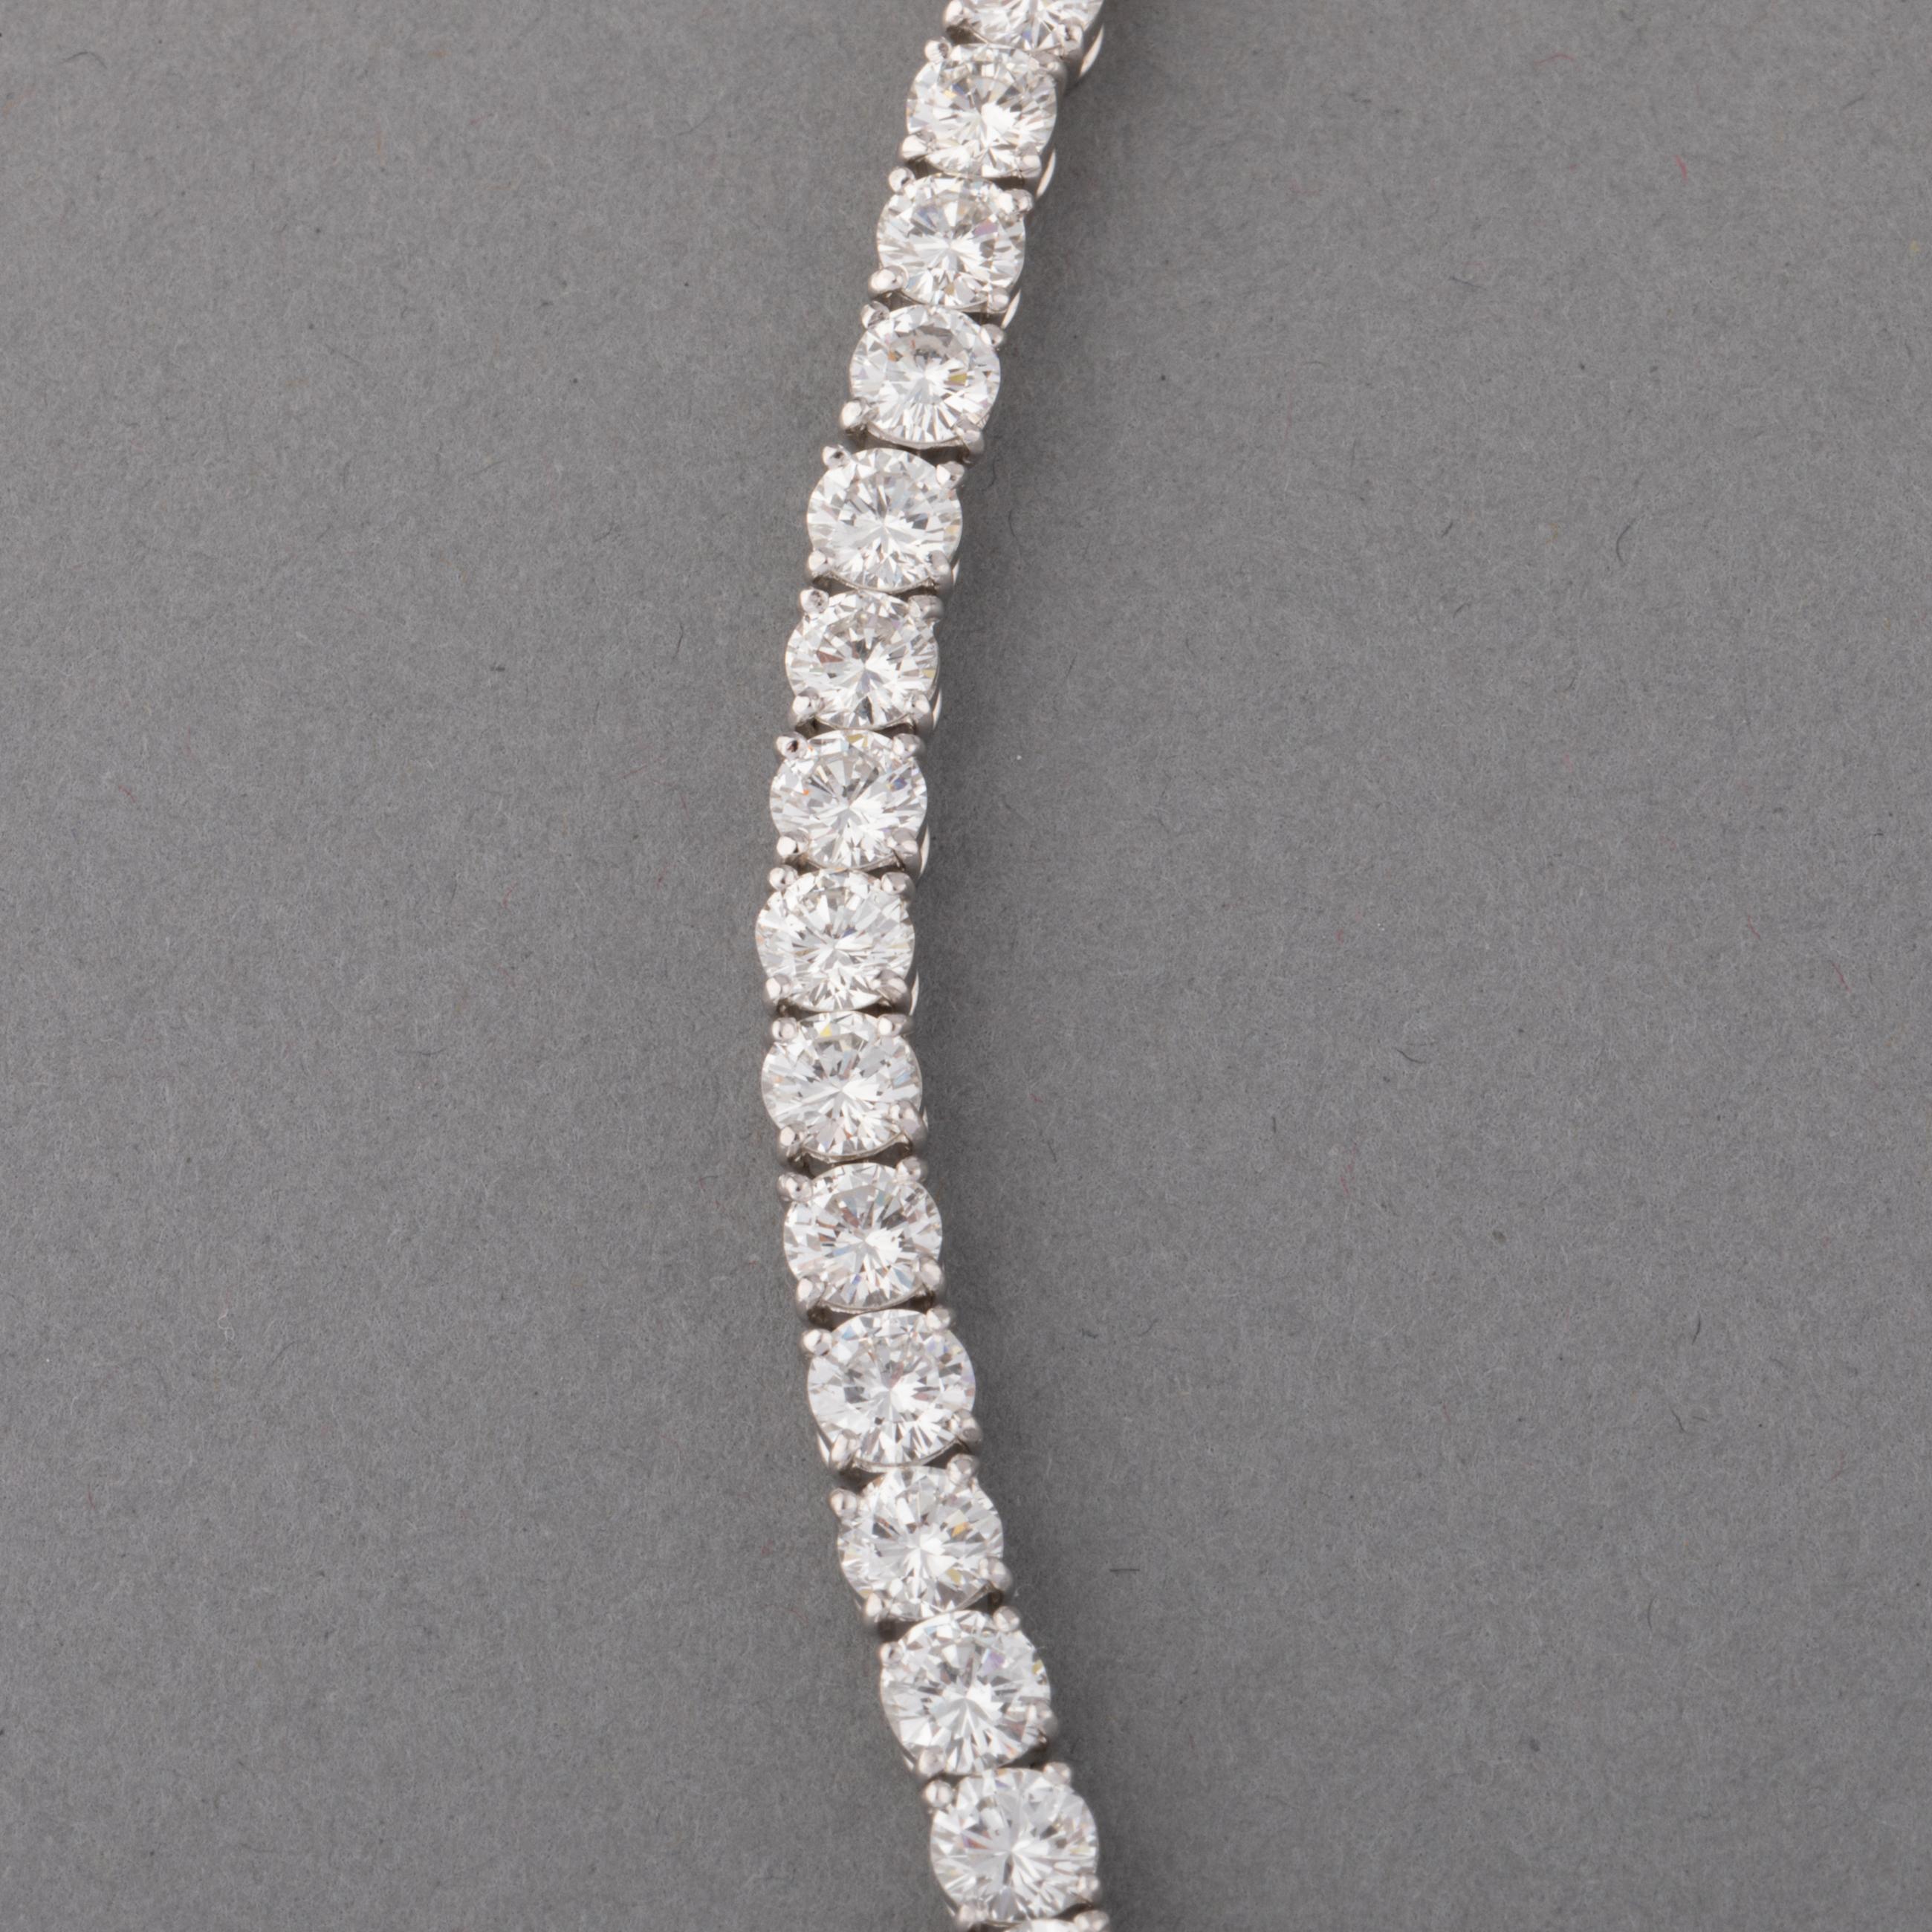 24 Carats Diamonds Chaumet River Necklace In Good Condition For Sale In Saint-Ouen, FR